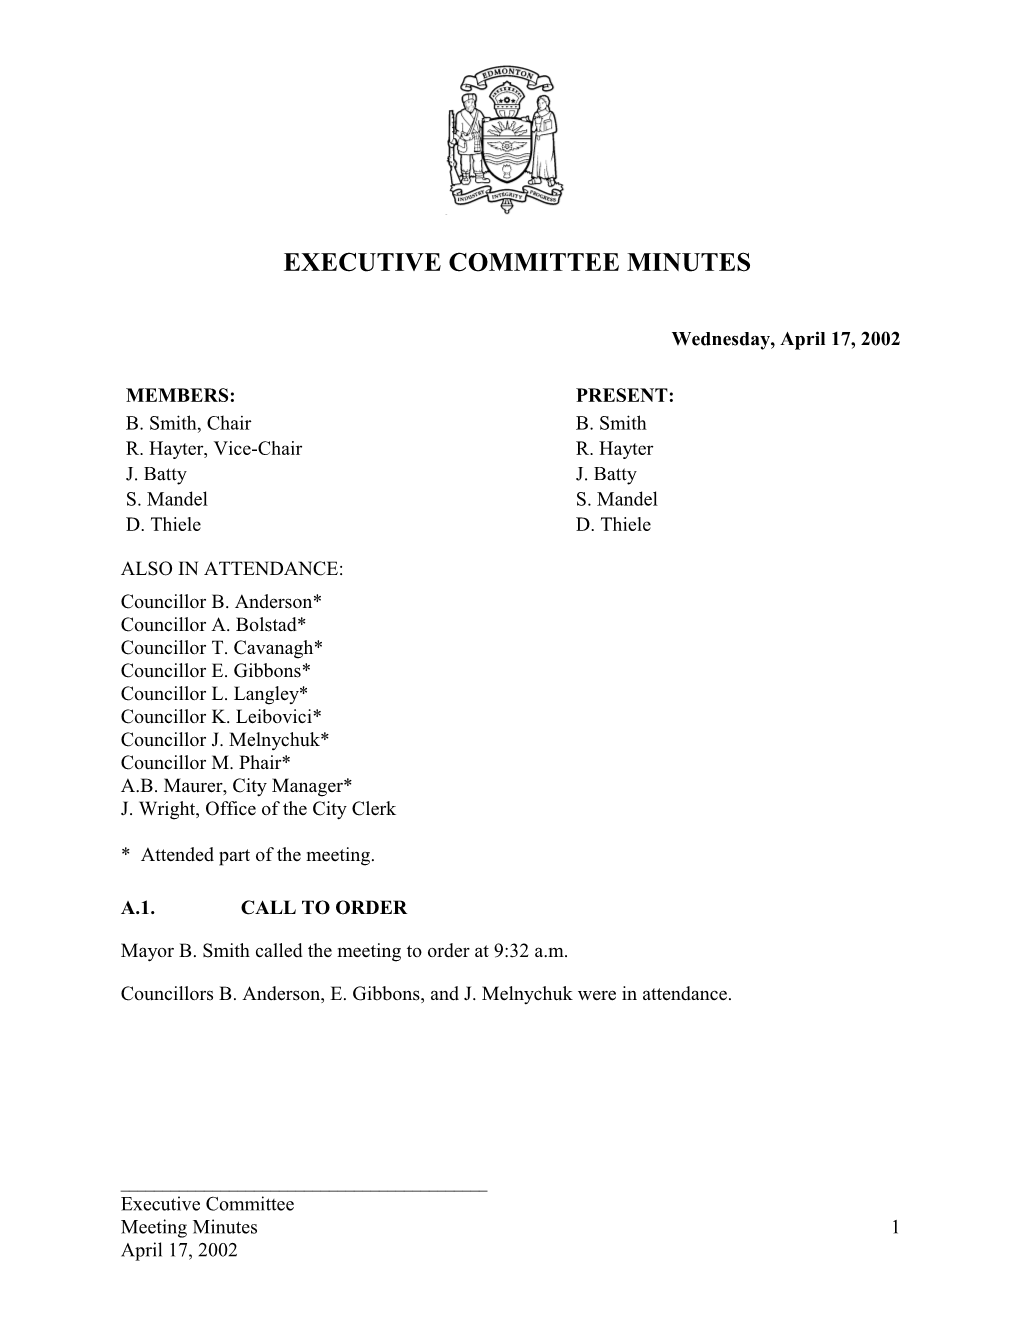 Minutes for Executive Committee April 17, 2002 Meeting